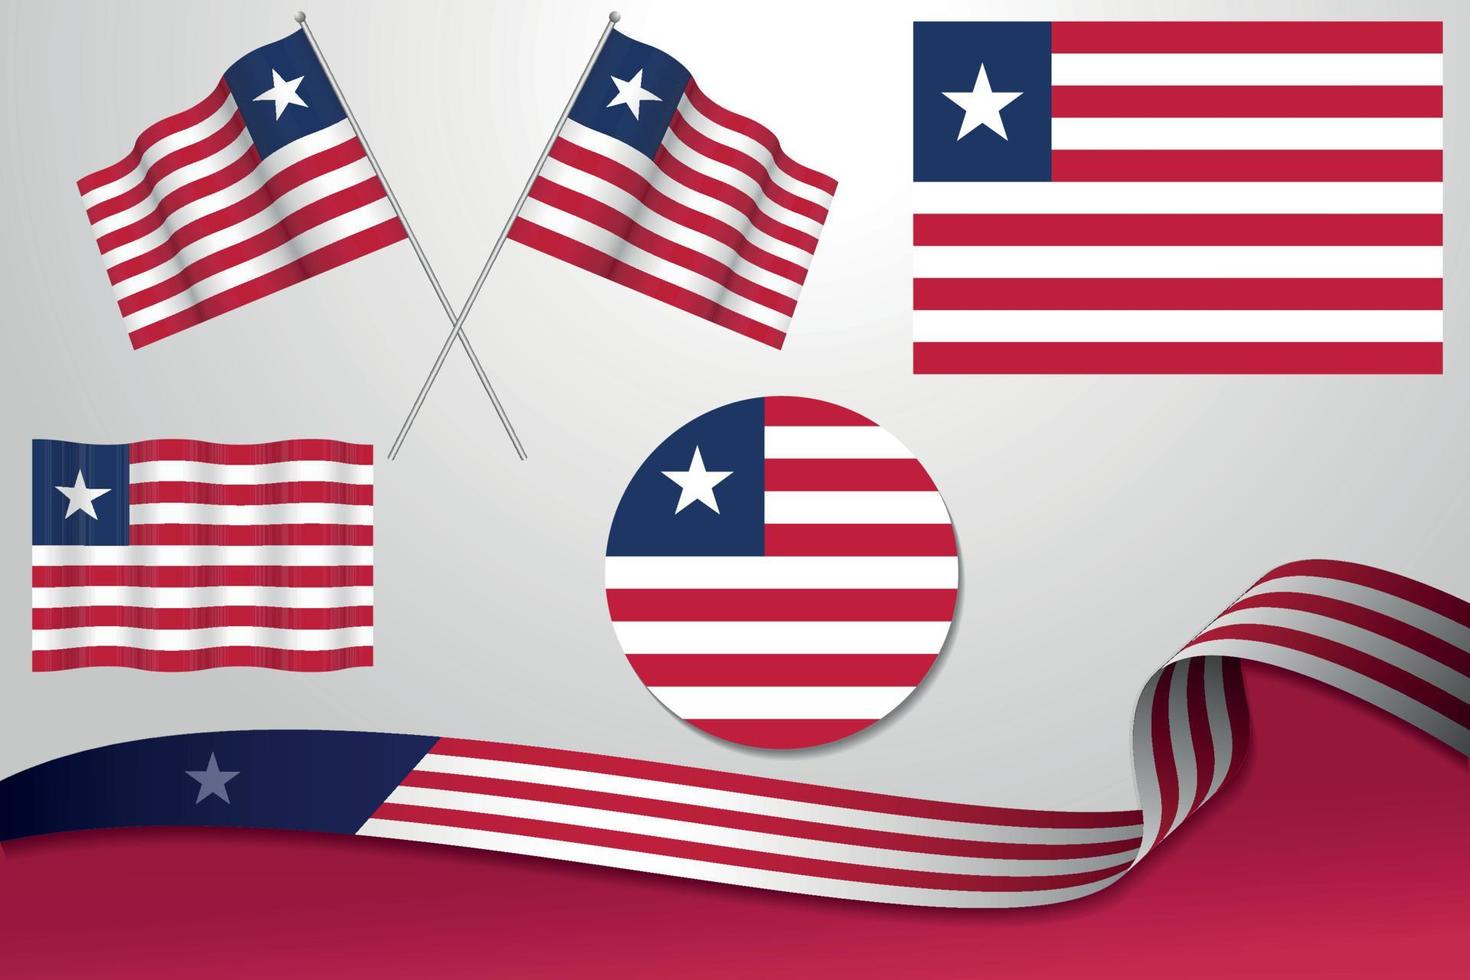 Set Of Liberia Flags In Different Designs, Icon, Flaying Flags With ribbon With Background. Free Vector